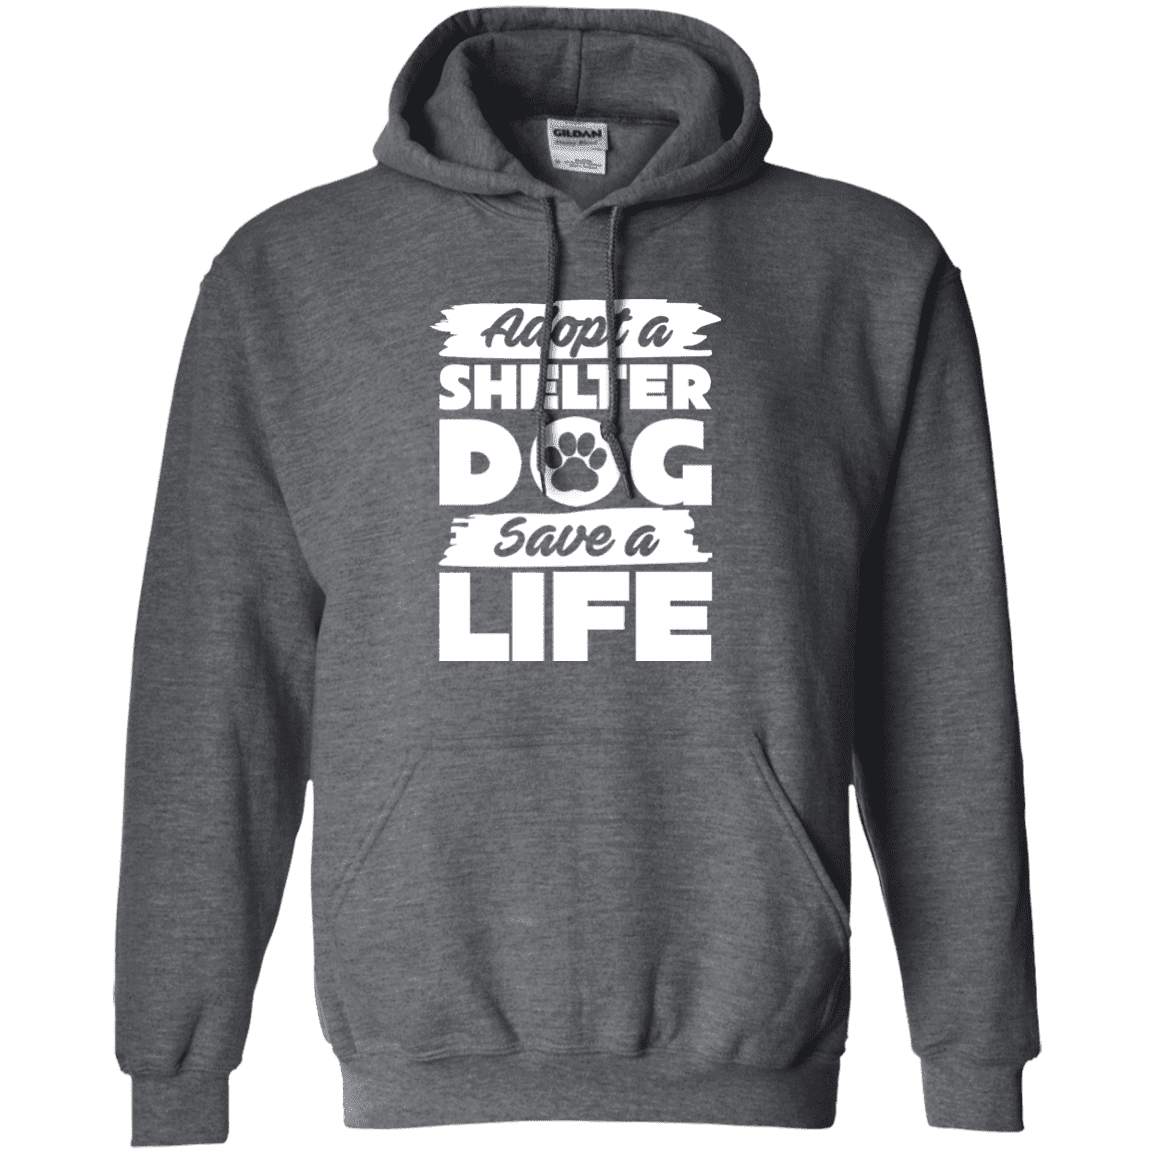 Adopt A Shelter Dog - Hoodie.